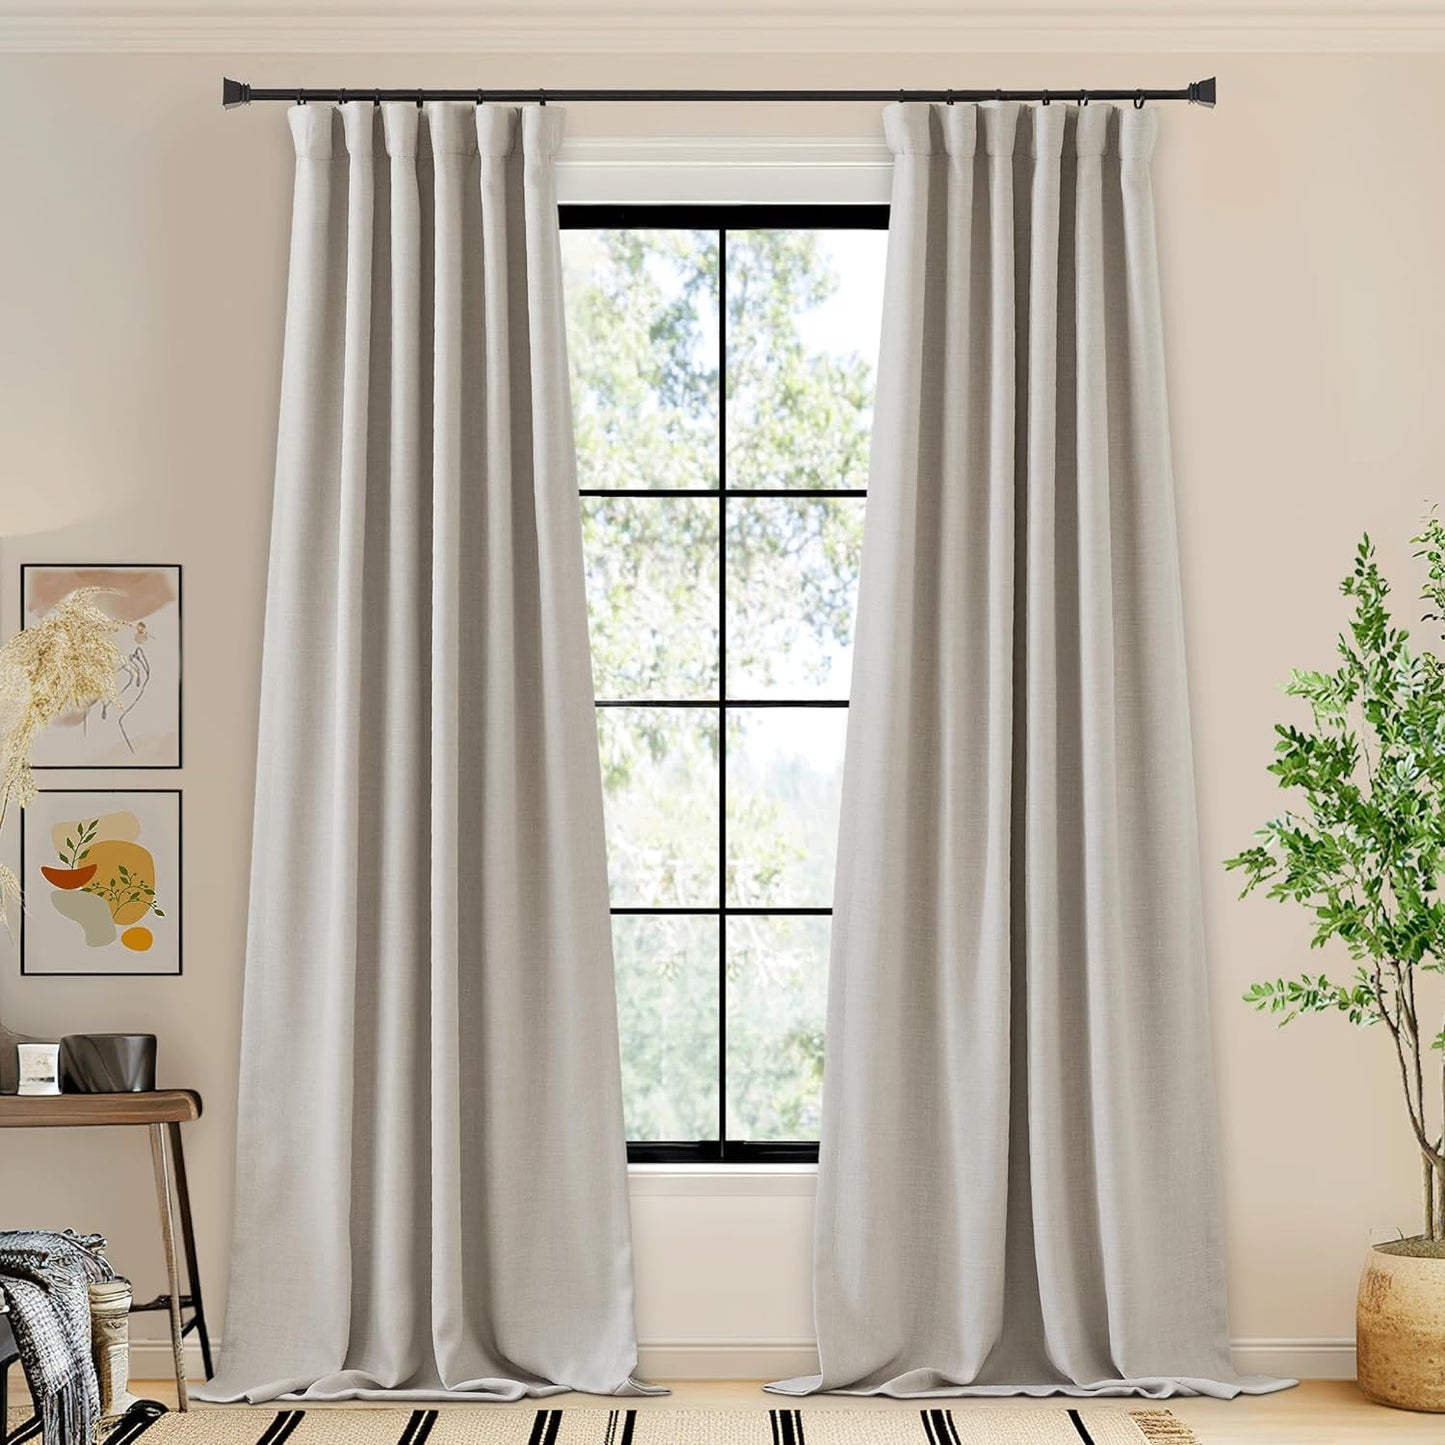 NICETOWN Sliding Door Curtains 84 Inch Length for Bedroom, Room Darkening Hook Belt/Rod Pocket/Back Tab Faux Linen Thermal Window Treatments for Living Room, Natural, W100 X L84, 1 Panel  NICETOWN Angora W50 X L108 